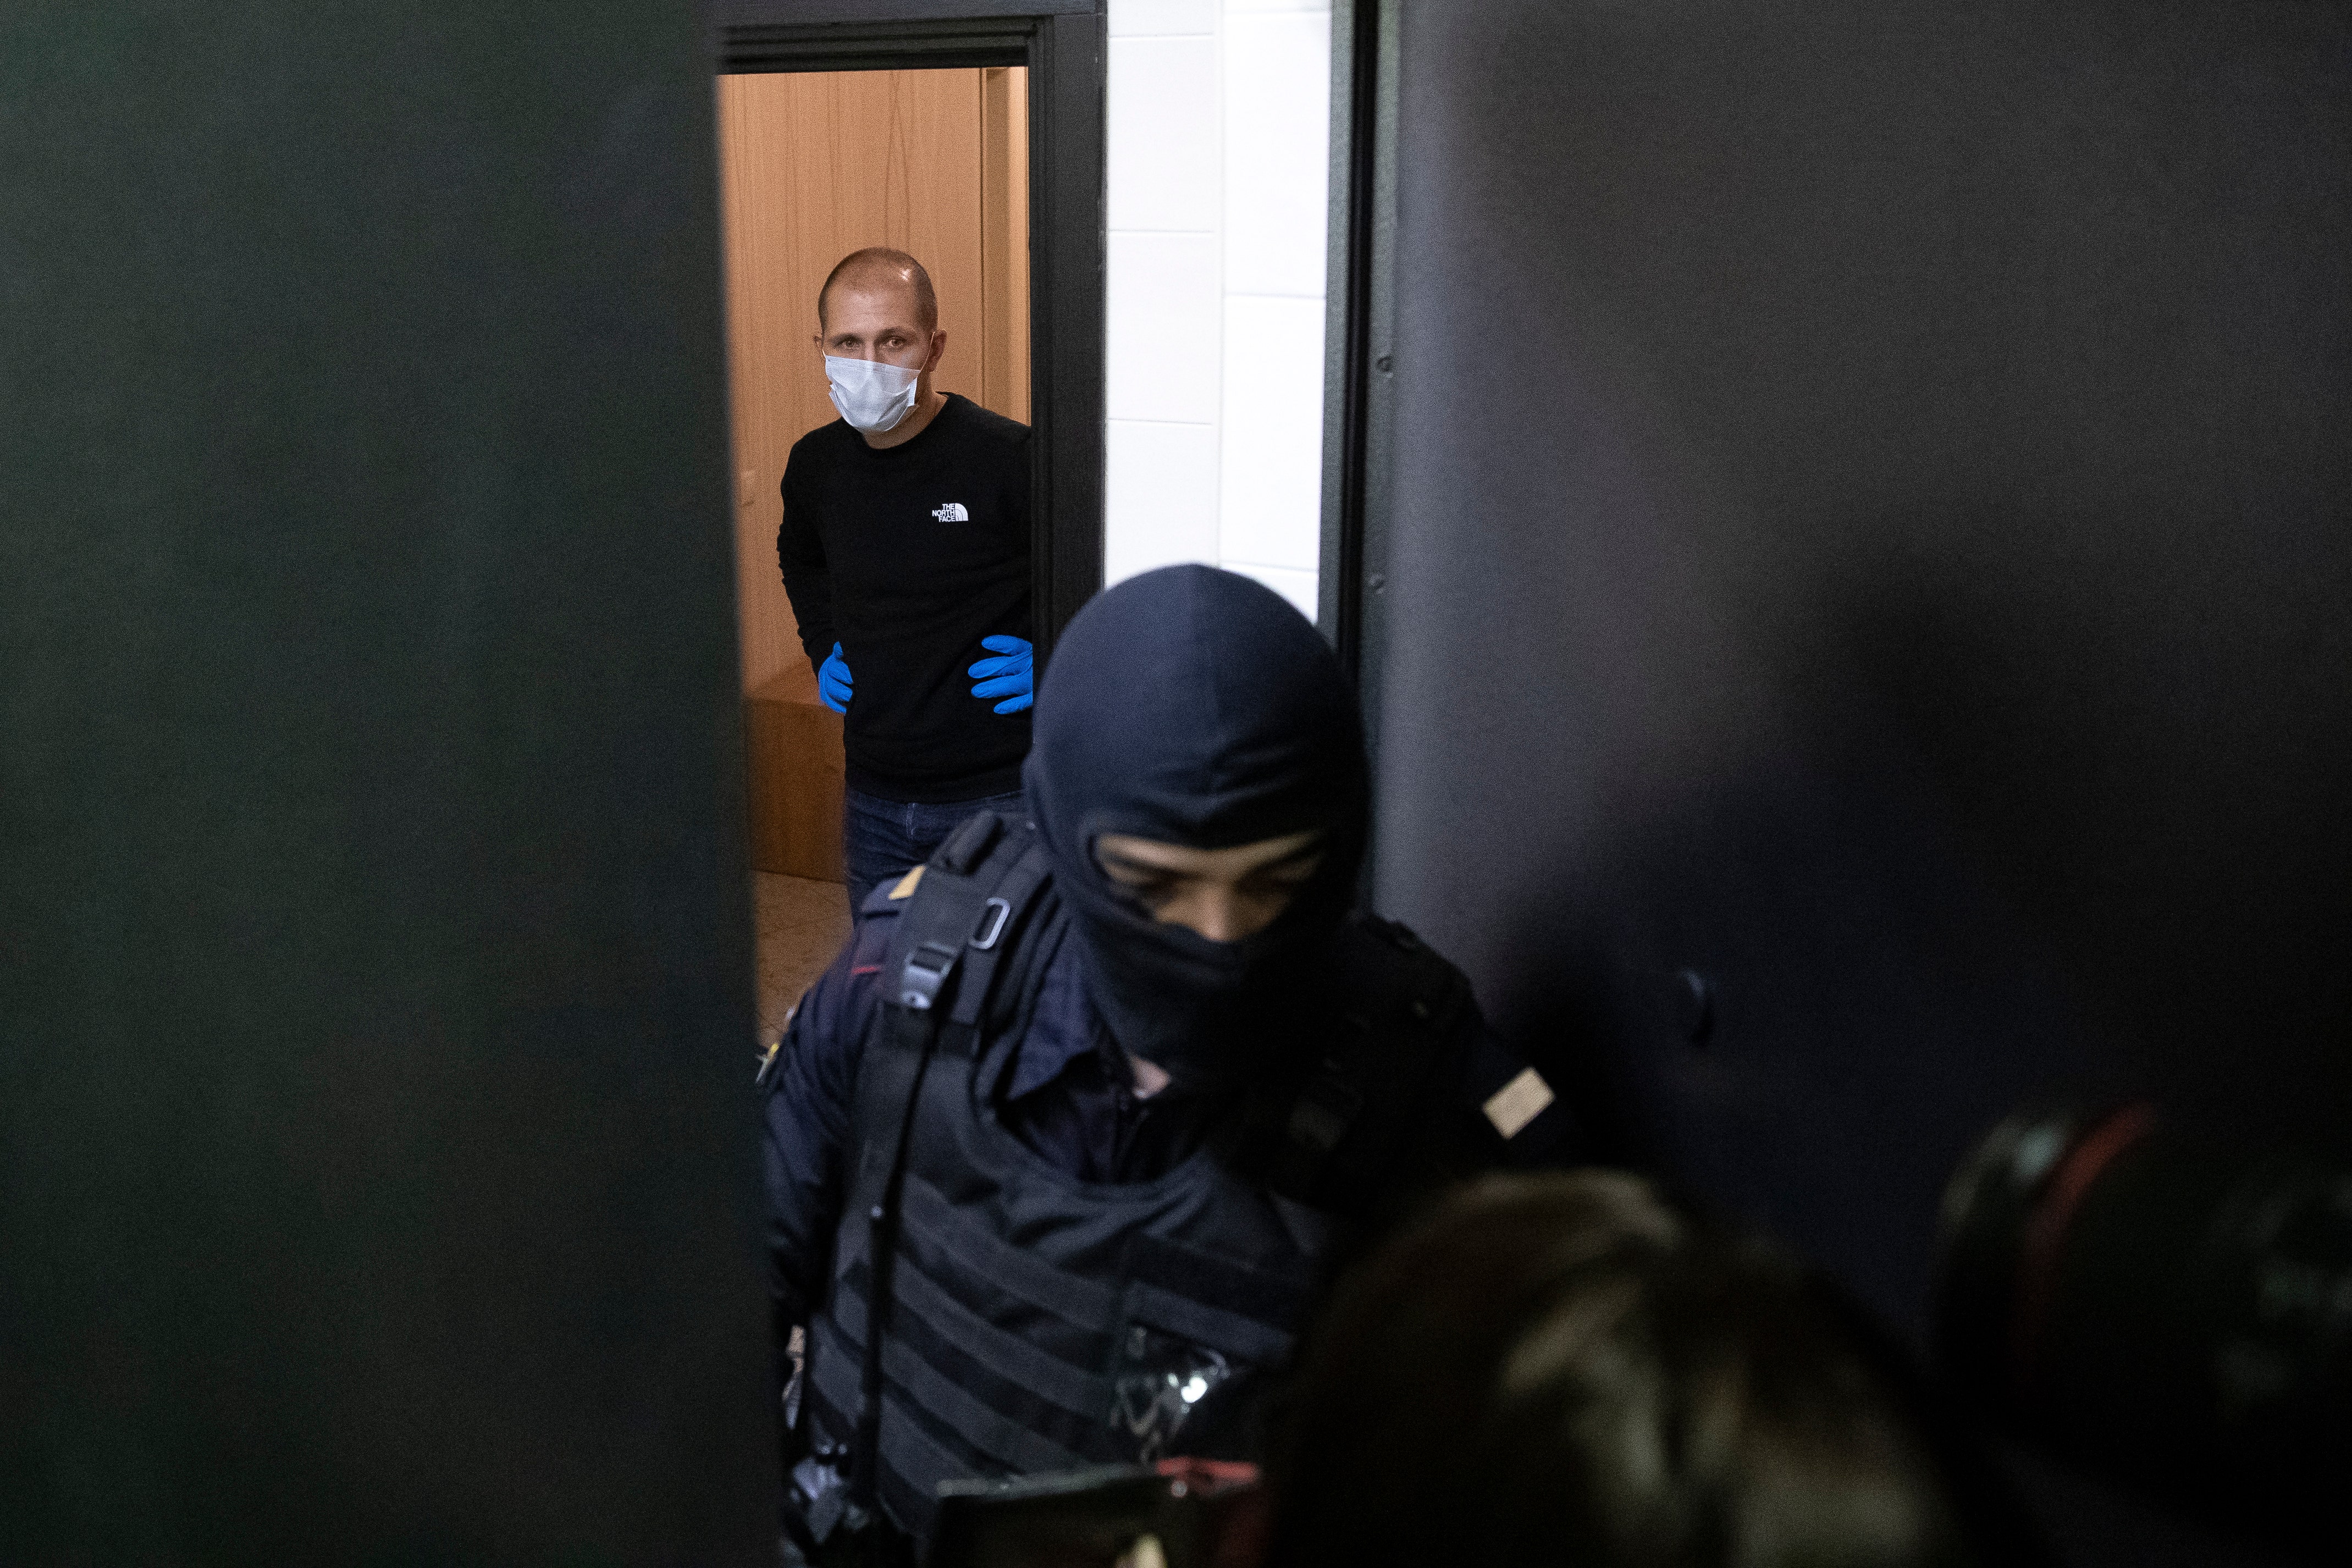 Police raided the Russian opposition leader Navalny’s apartment and offices